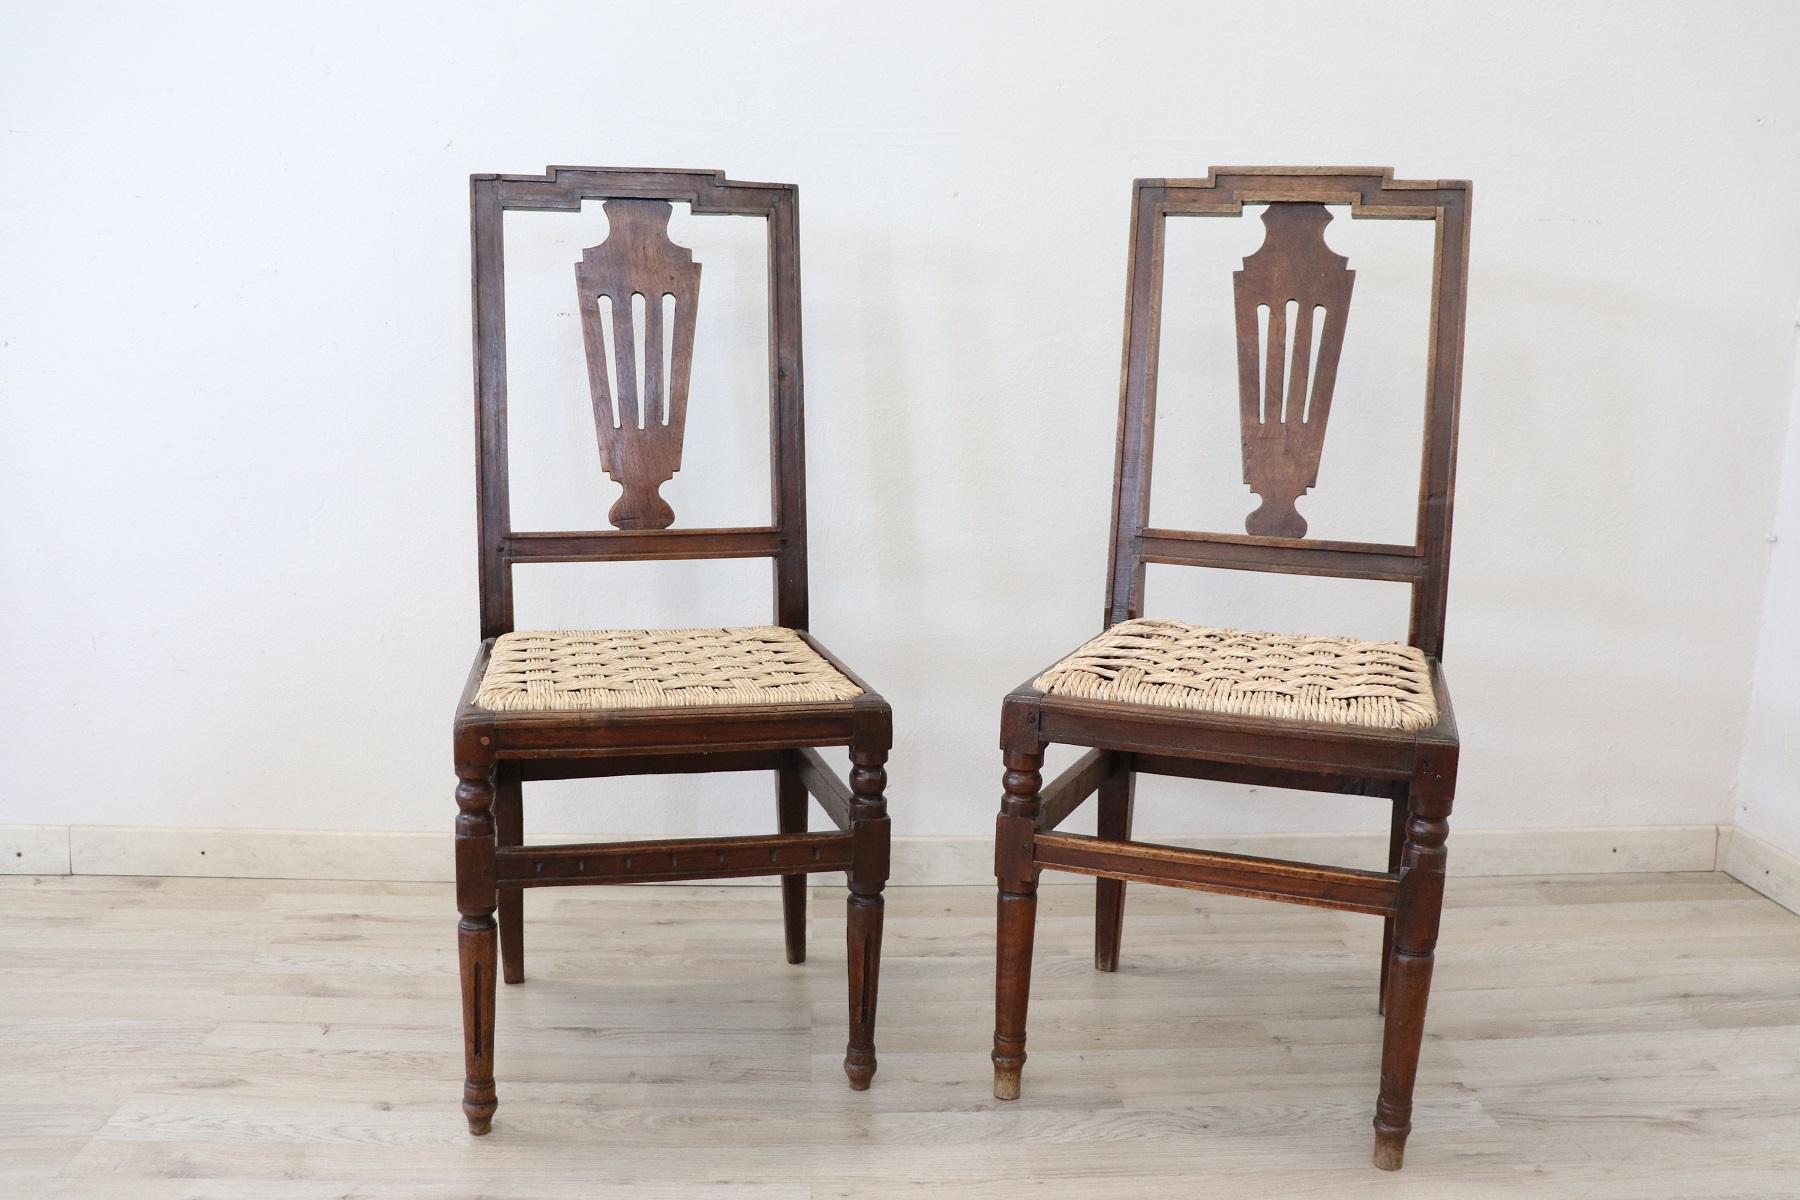 Pair of refined 18th century authentic Italian Louis XVI walnut wood chairs. The legs are very elegant straight. The seat is wide and comfortable. The seat in plaited woven straw. The chairs are used have small signs of wear. Please look good all